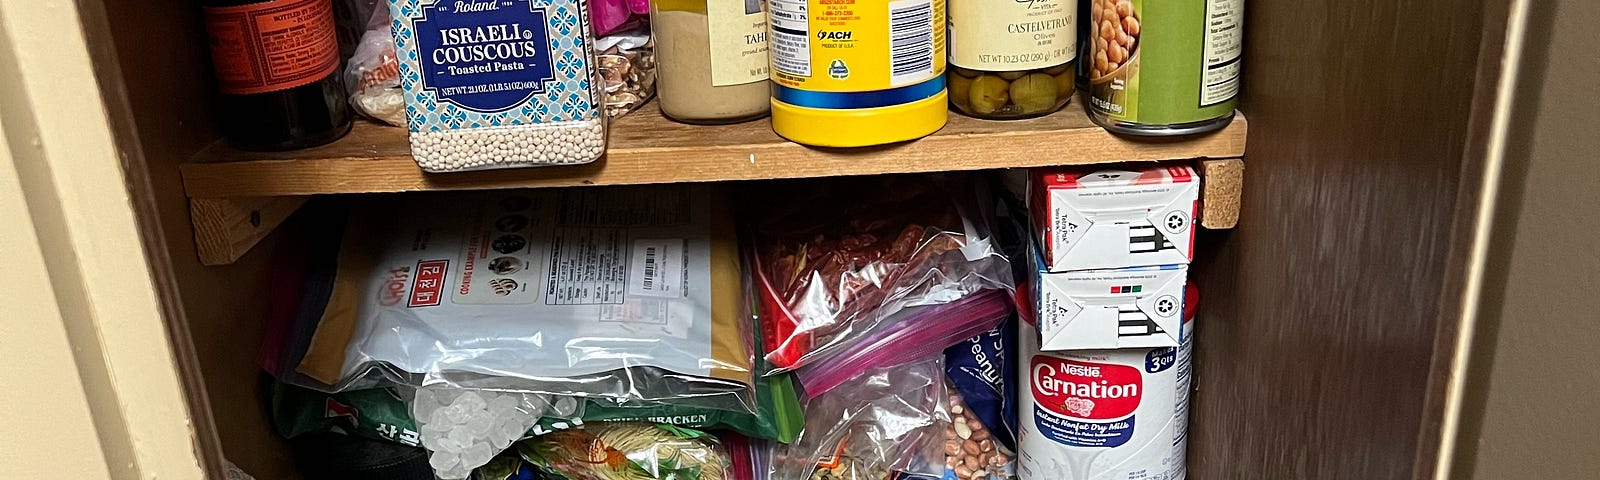 The Author’s terribly disorganized pantry cabinet containing a kitchenaid mixer and a hodgepodge of random shelf-stable ingredients.